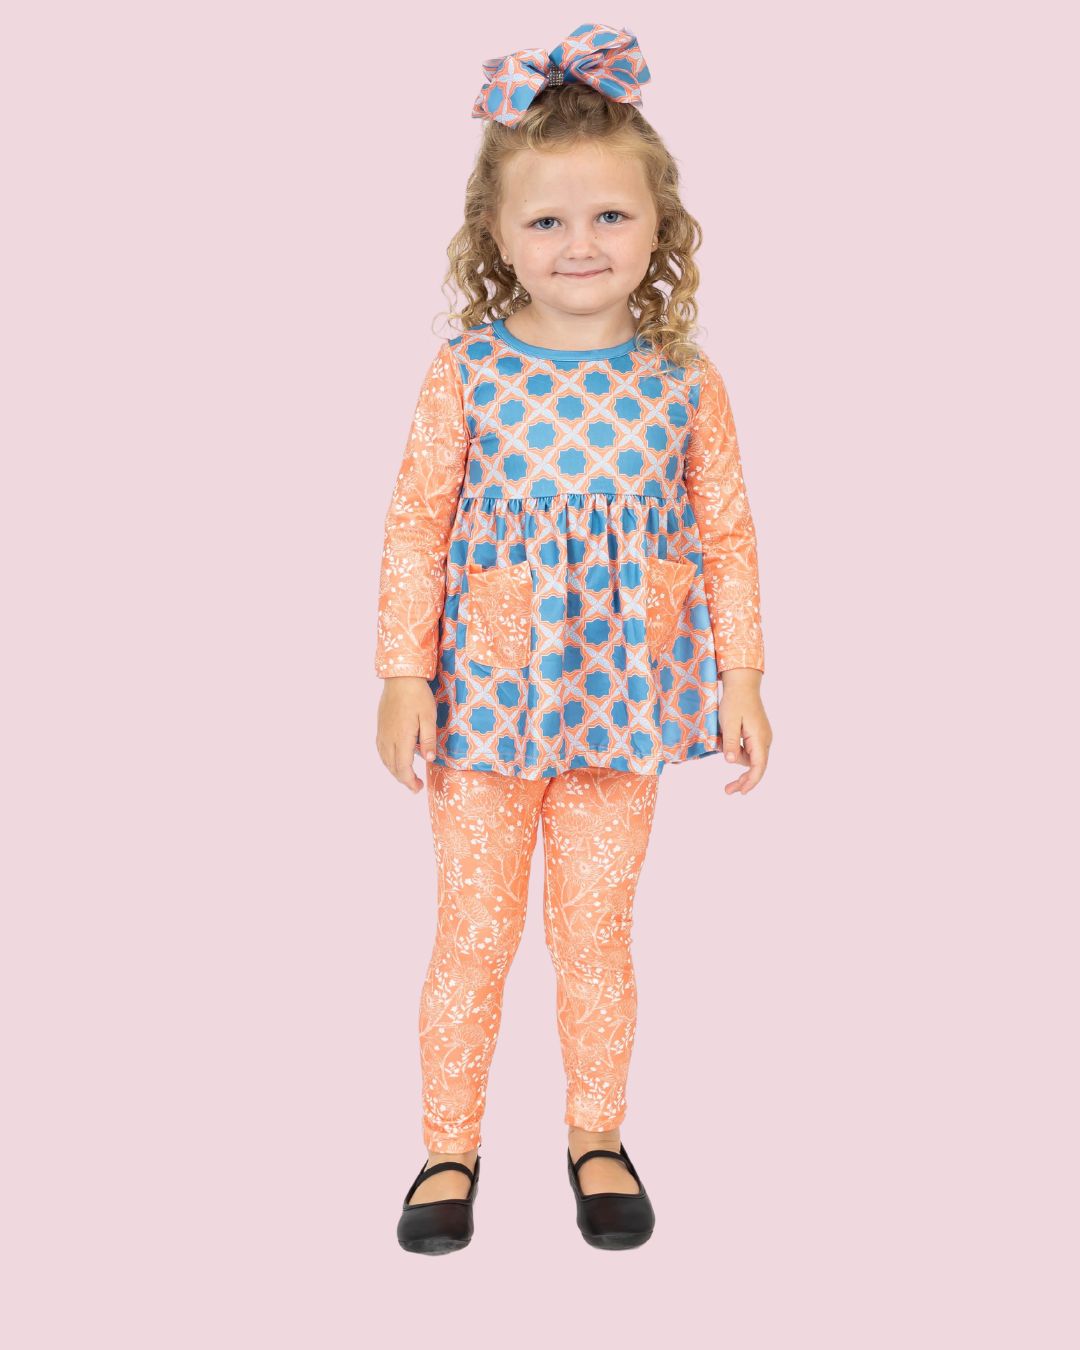 Teal and Orange Medley Pants Set by Pete & Lucy